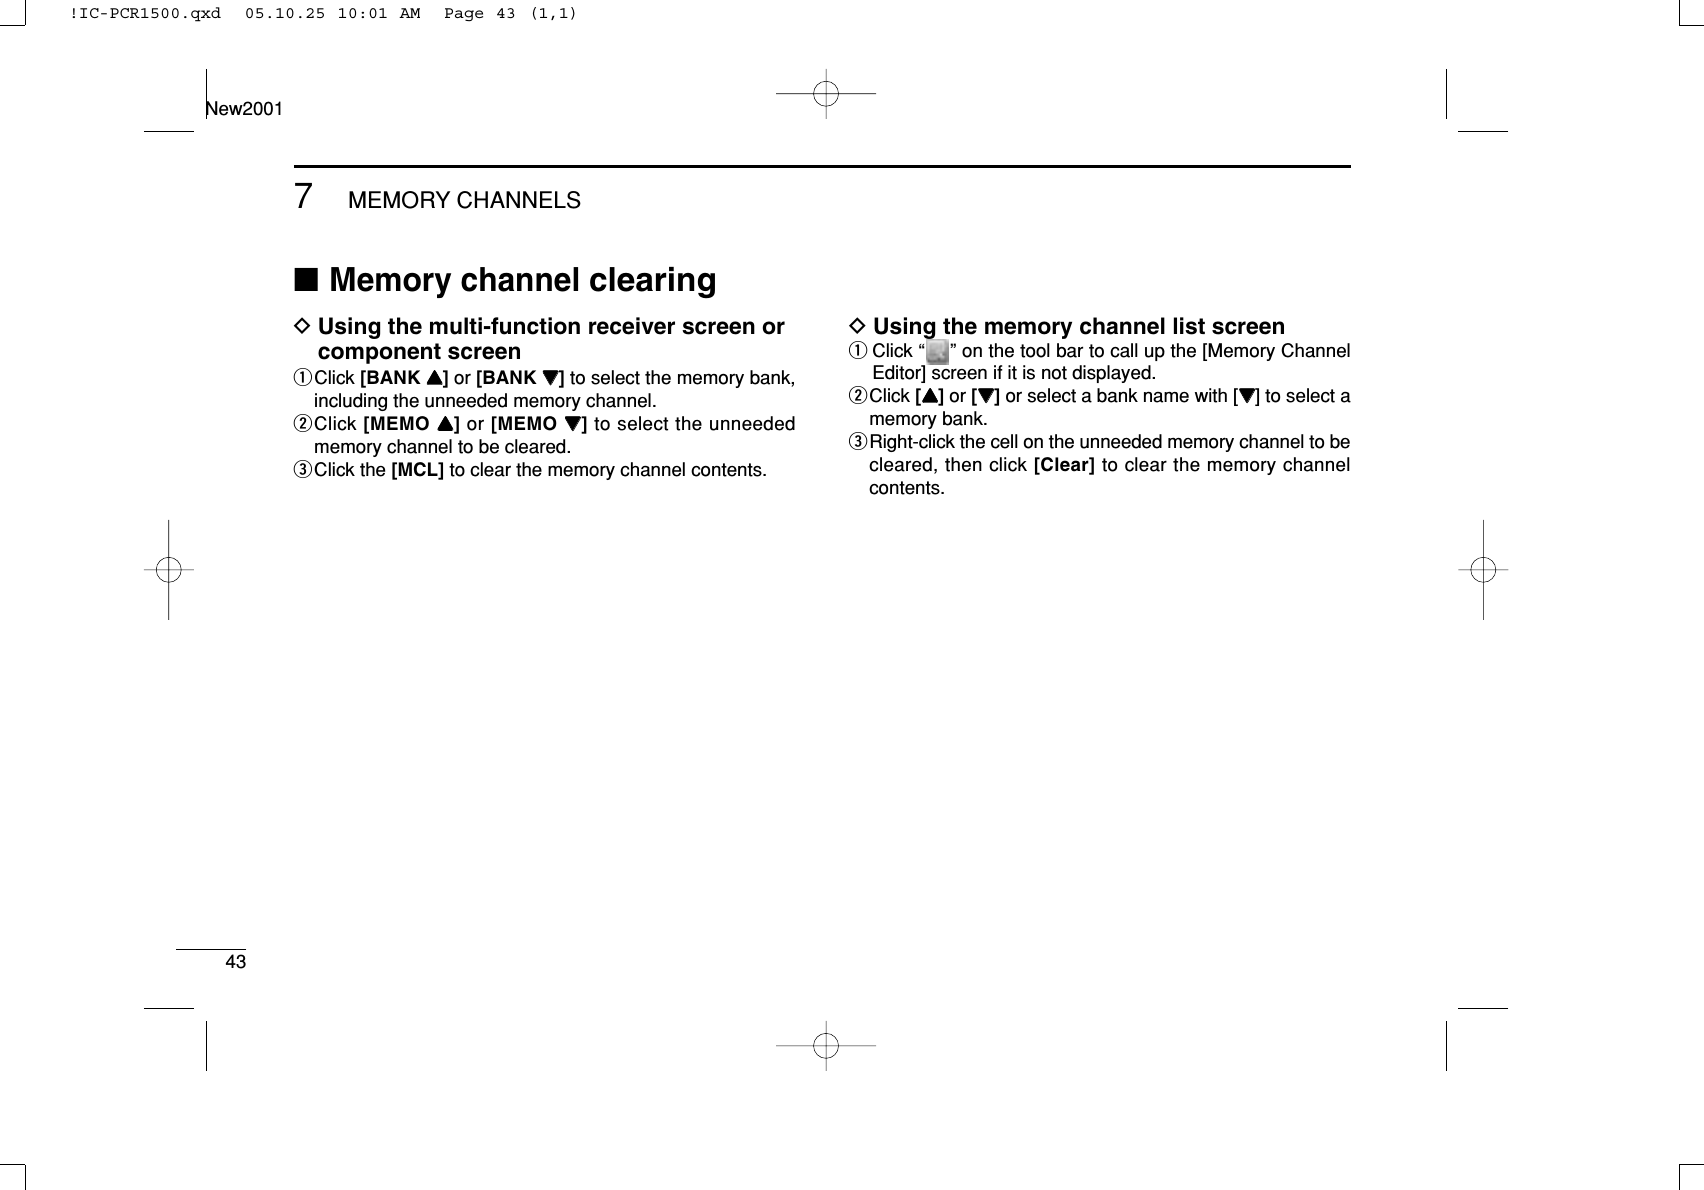 437MEMORY CHANNELSNew2001■Memory channel clearingDUsing the multi-function receiver screen orcomponent screenqClick [BANK YY]or [BANK ZZ]to select the memory bank,including the unneeded memory channel.wClick [MEMO YY]or [MEMO ZZ]to select the unneededmemory channel to be cleared.eClick the [MCL] to clear the memory channel contents.DUsing the memory channel list screenqClick “ ” on the tool bar to call up the [Memory ChannelEditor] screen if it is not displayed.wClick [YY]or [ZZ]or select a bank name with [ZZ] to select amemory bank.eRight-click the cell on the unneeded memory channel to becleared, then click [Clear] to clear the memory channelcontents.!IC-PCR1500.qxd  05.10.25 10:01 AM  Page 43 (1,1)